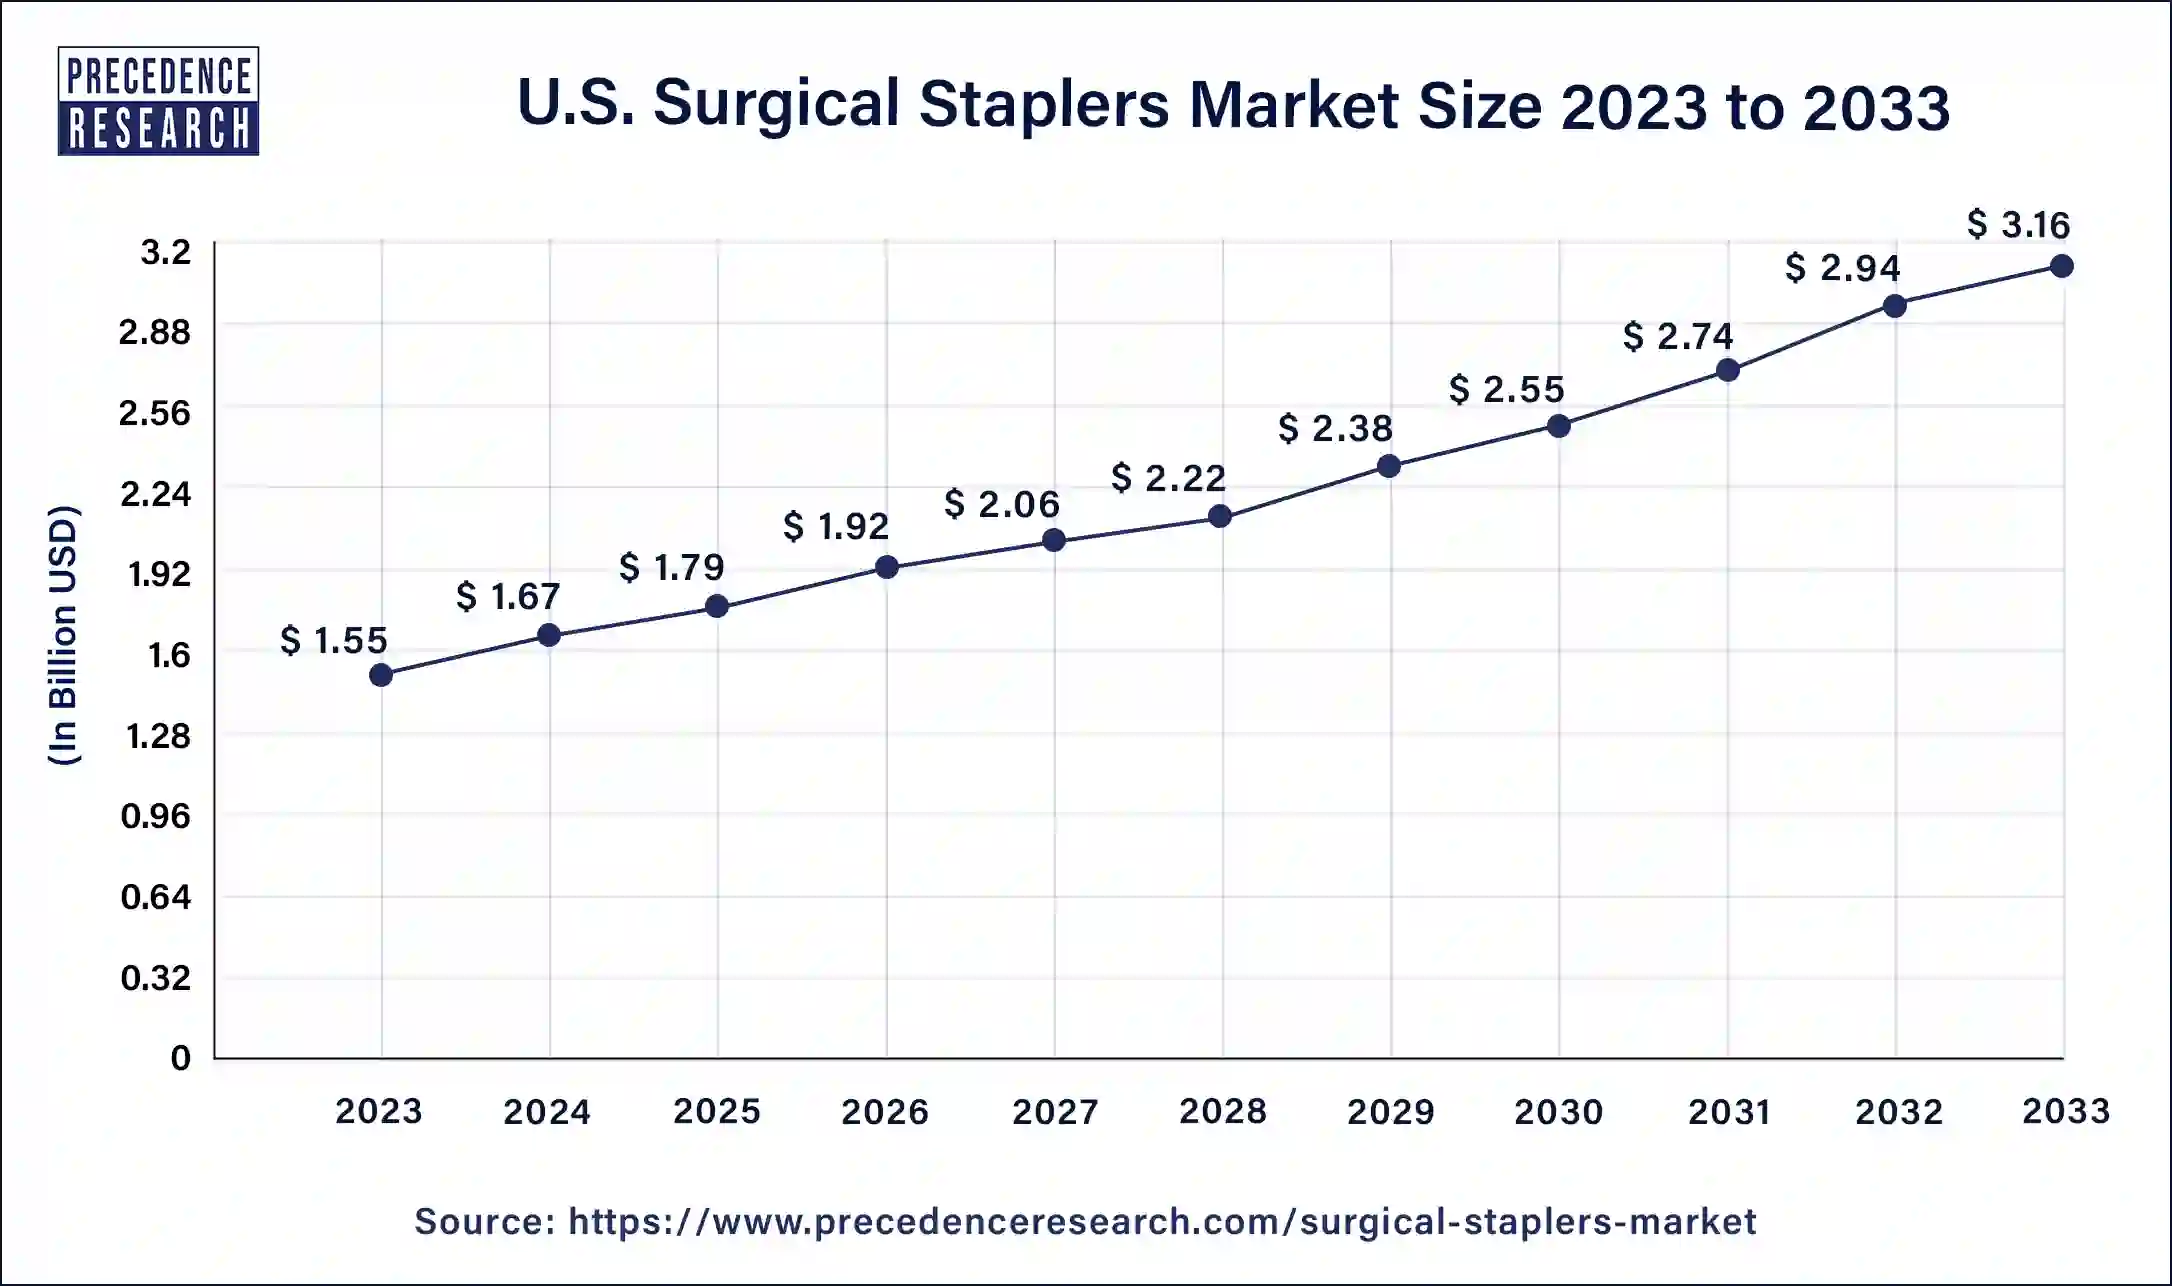 U.S. Surgical Staplers Market Size 2024 to 2033